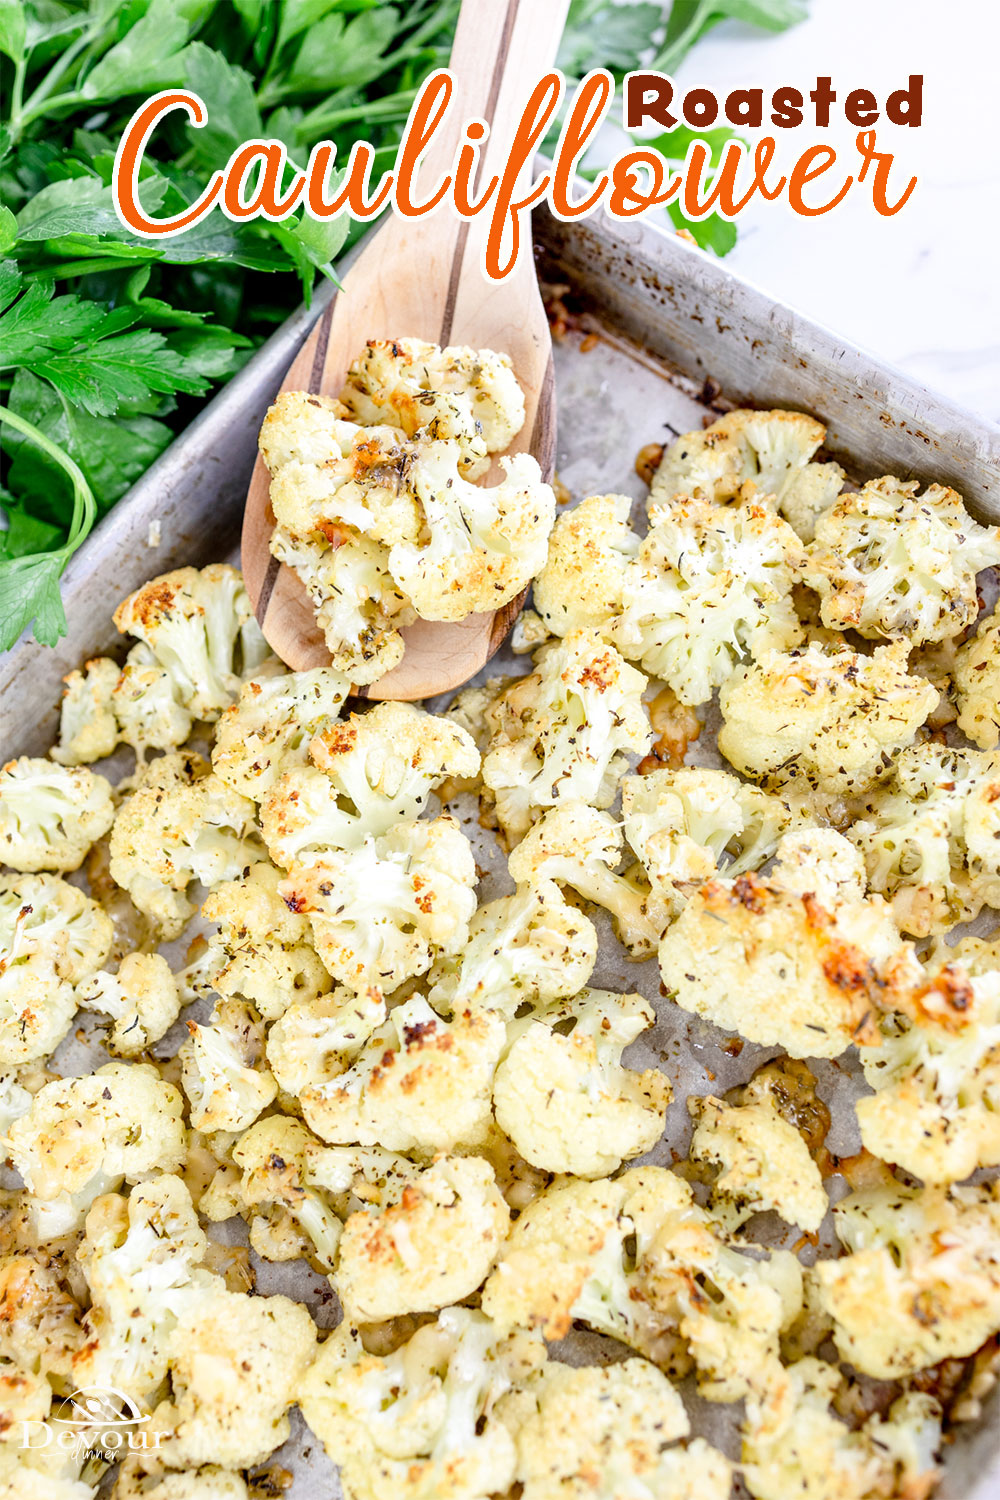 This Roasted Cauliflower with Parmesan recipe will take your cauliflower side dish to the next level. It's perfectly seasoned with garlic and Italian herbs, deliciously cheesy, and so moreish, you'll forget it's even a vegetable!